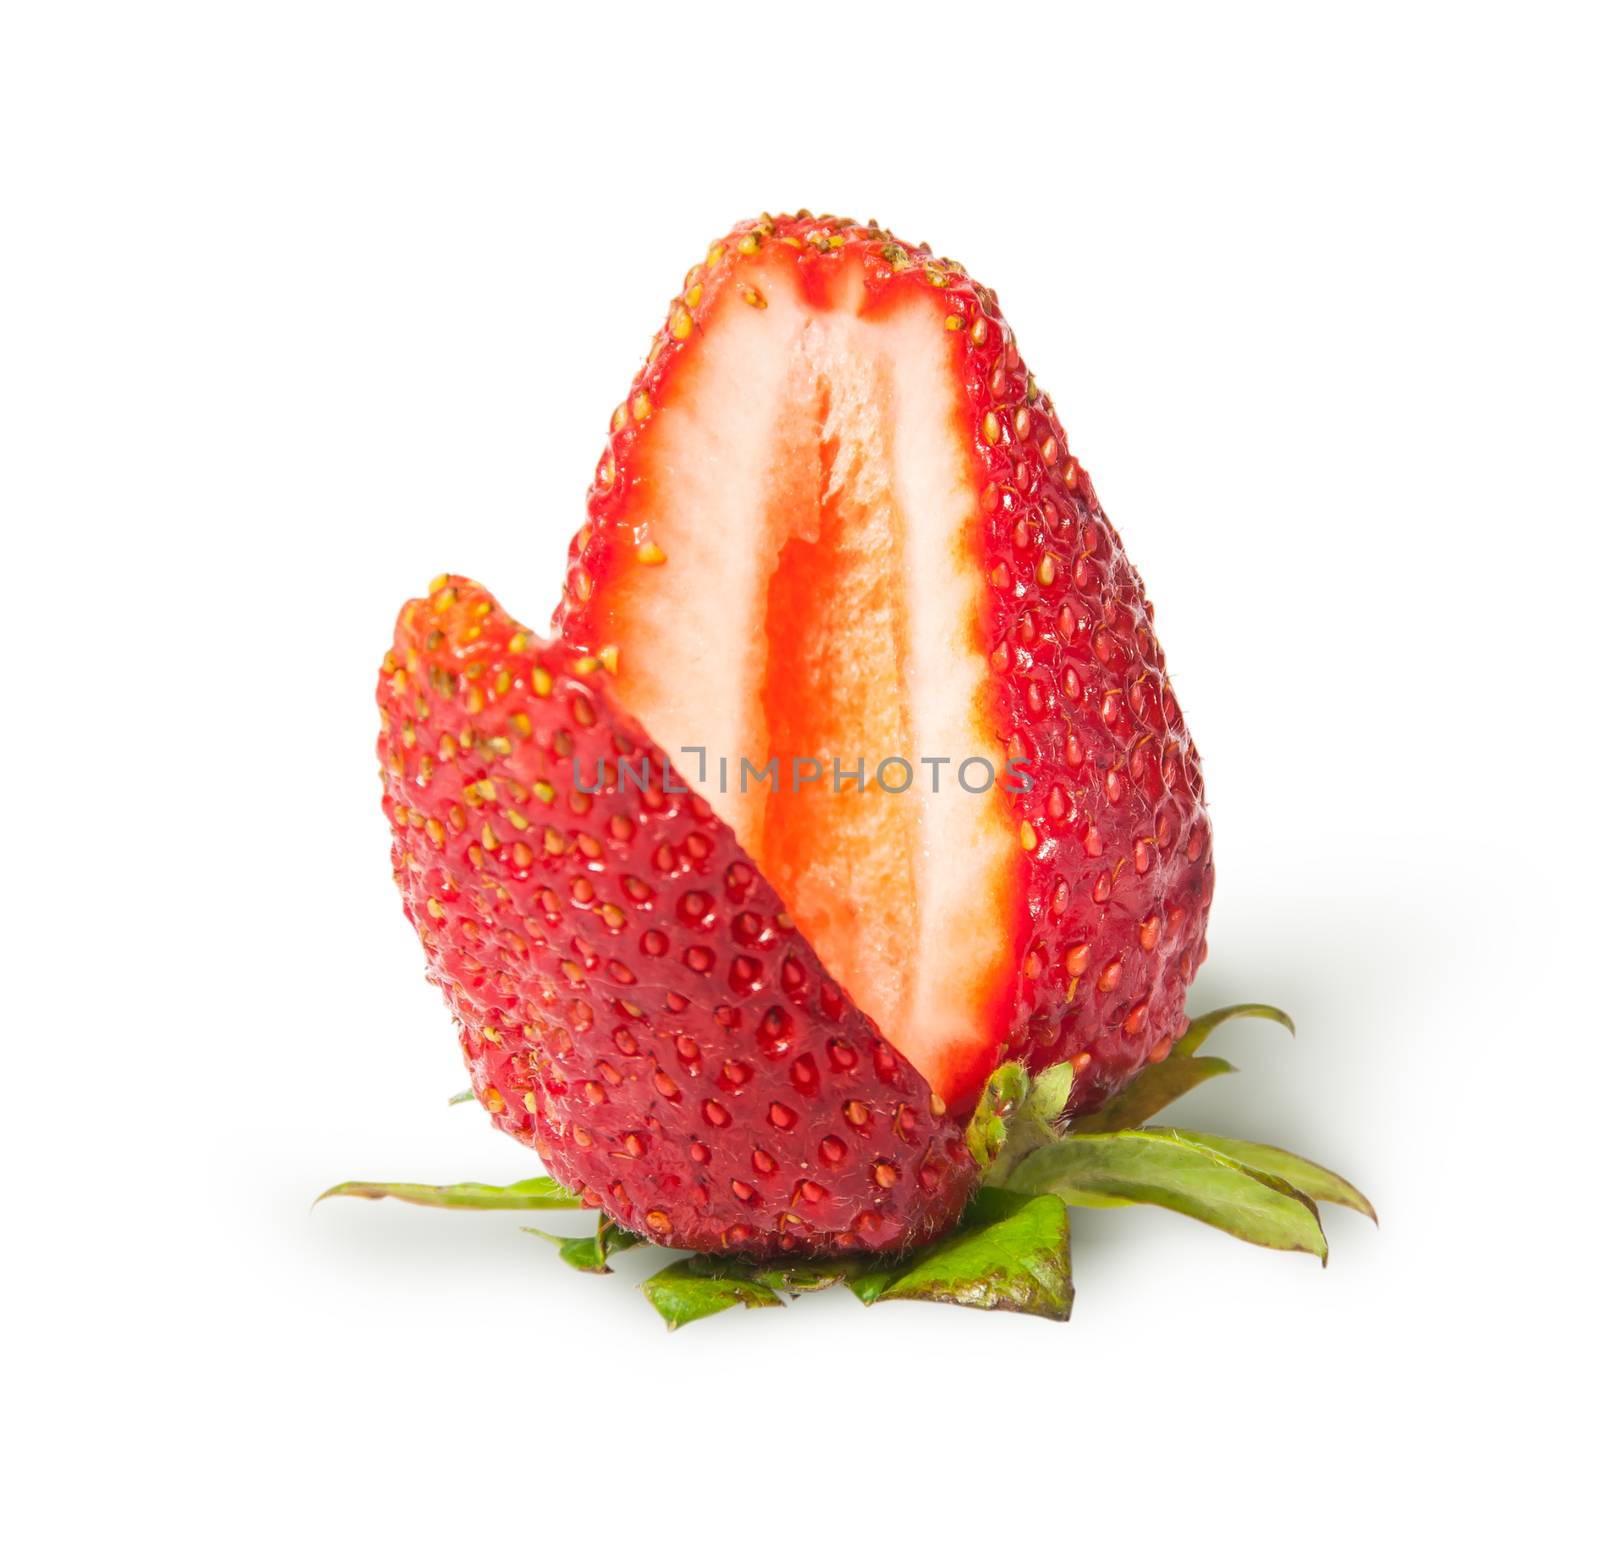 Juicy ripe strawberries with cut segment rotated by Cipariss